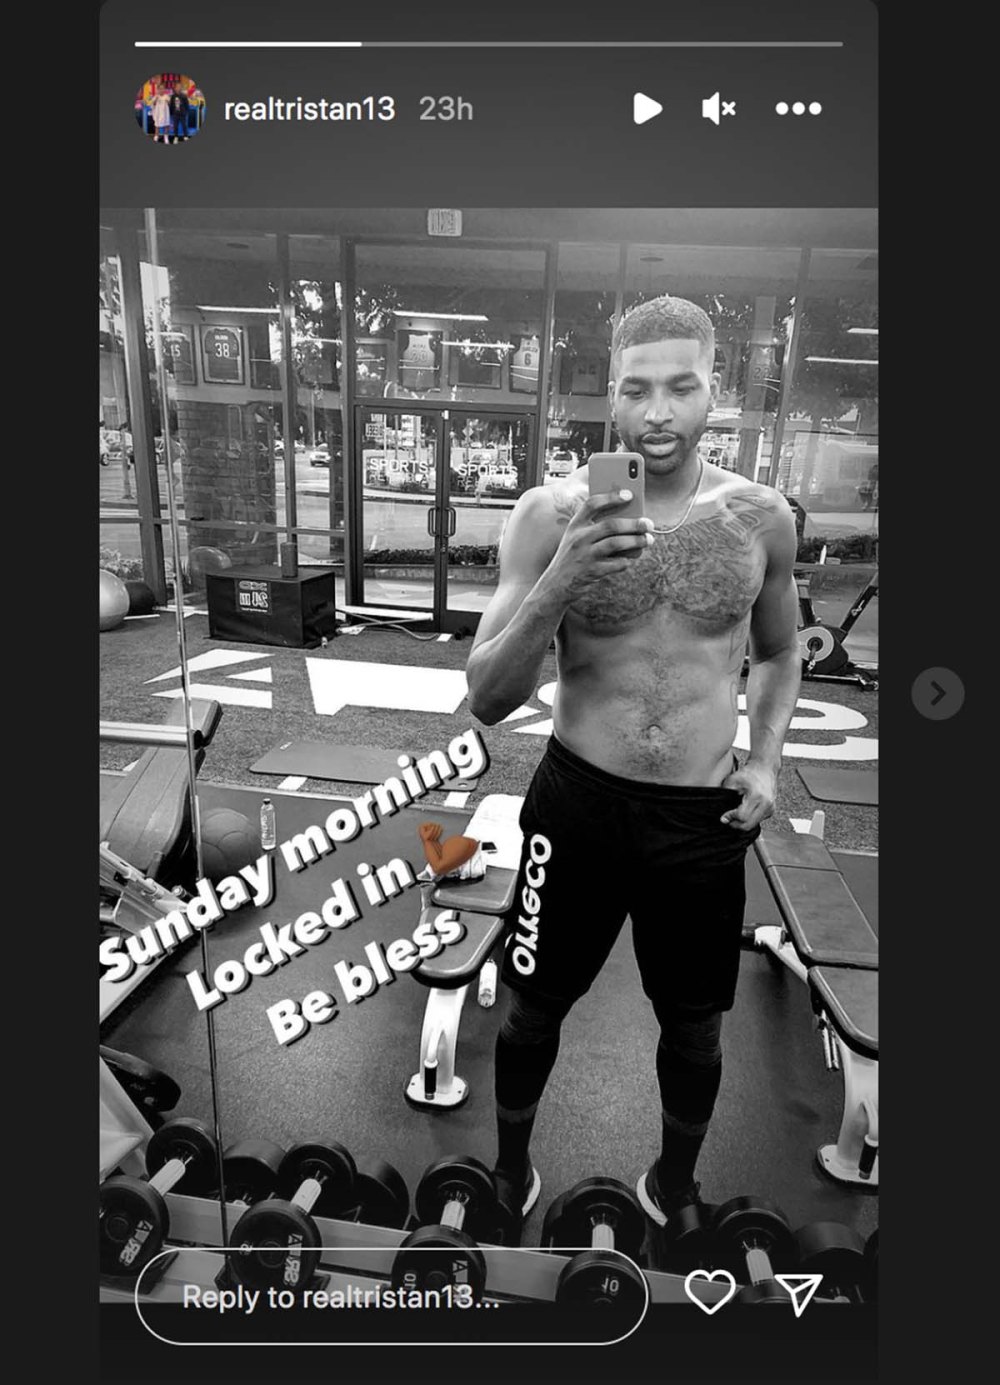 Tristan Thompson Poses Shirtless After Khloe Flirts With Michele Morrone